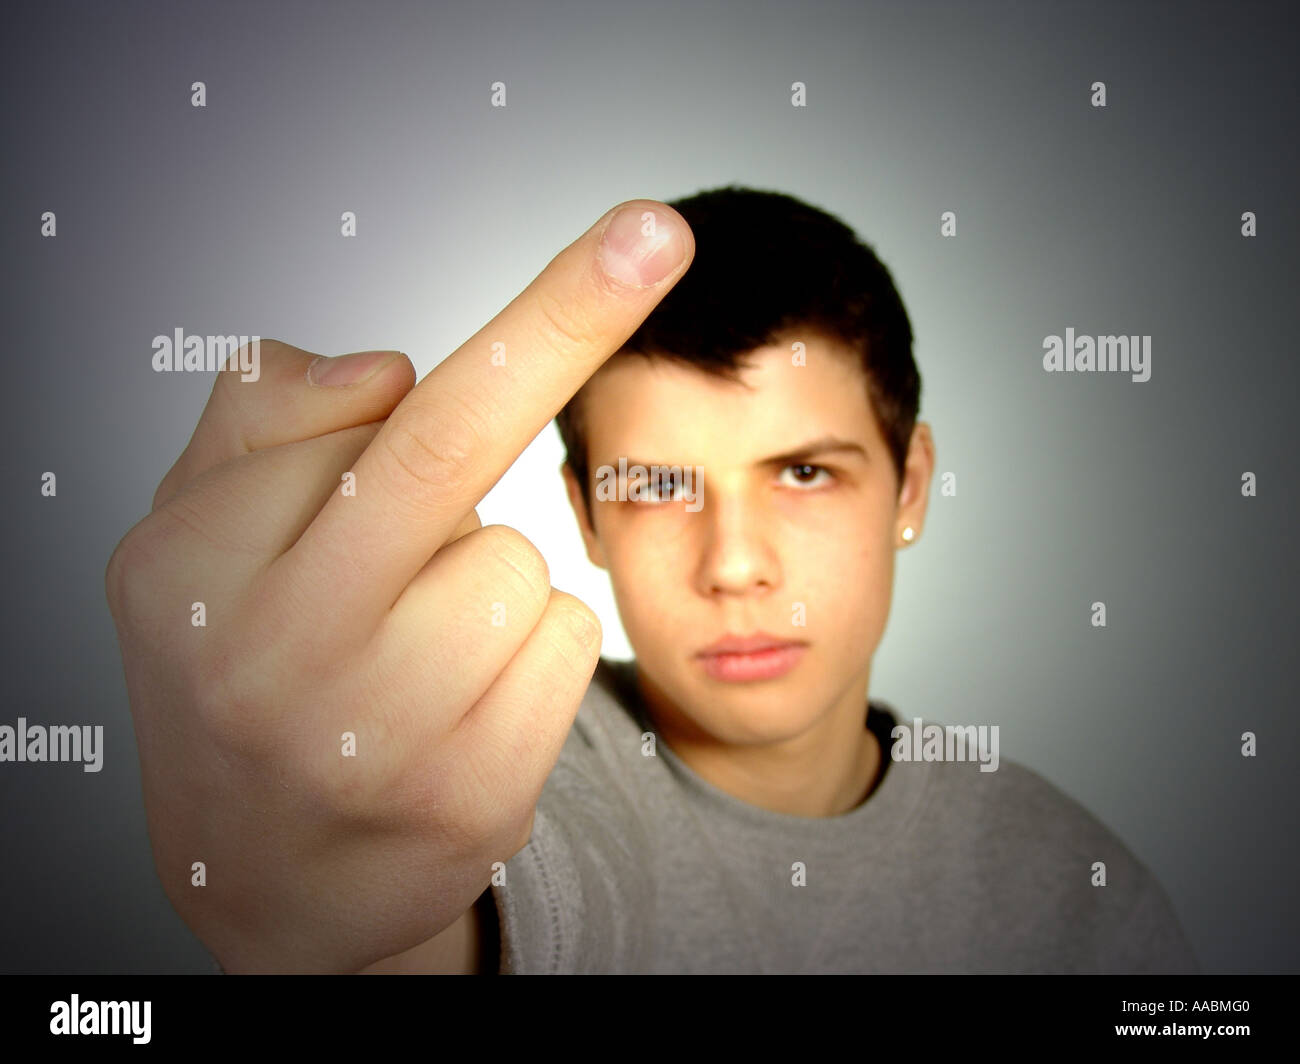 teenager shows the stinking finger Stock Photo